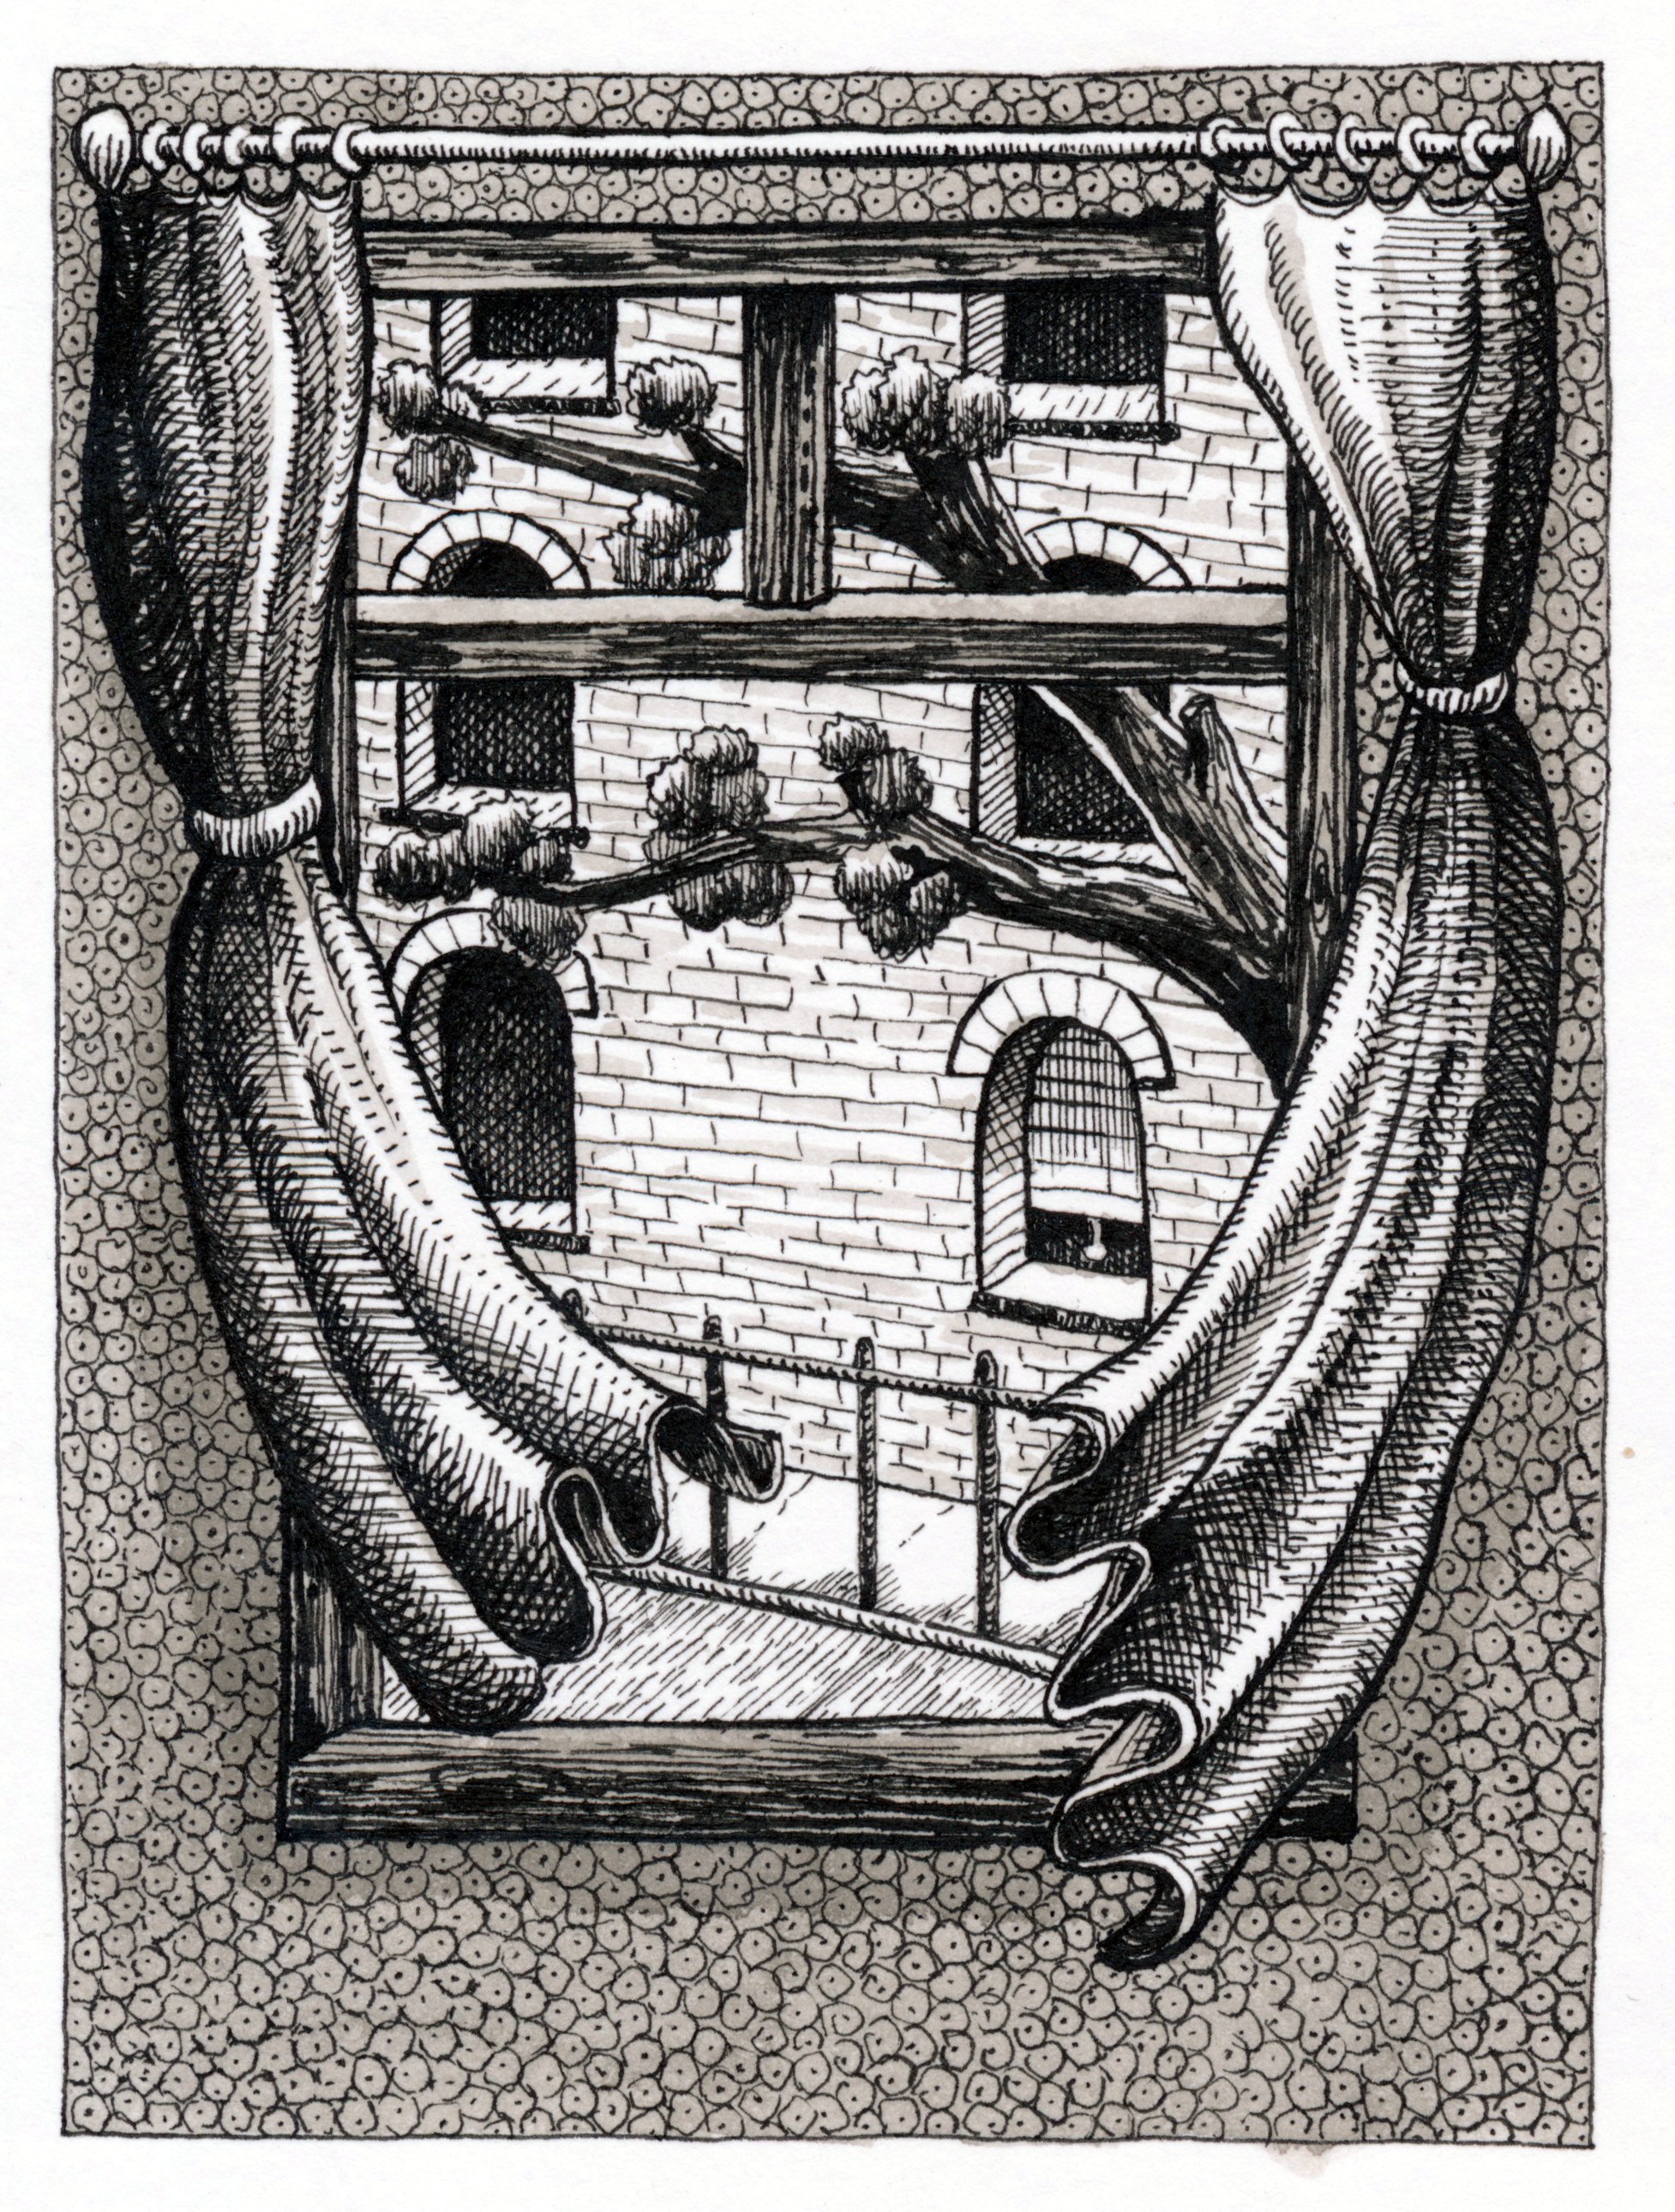 A pen and ink drawing of a window and curtains overlooking a tree and garden. 